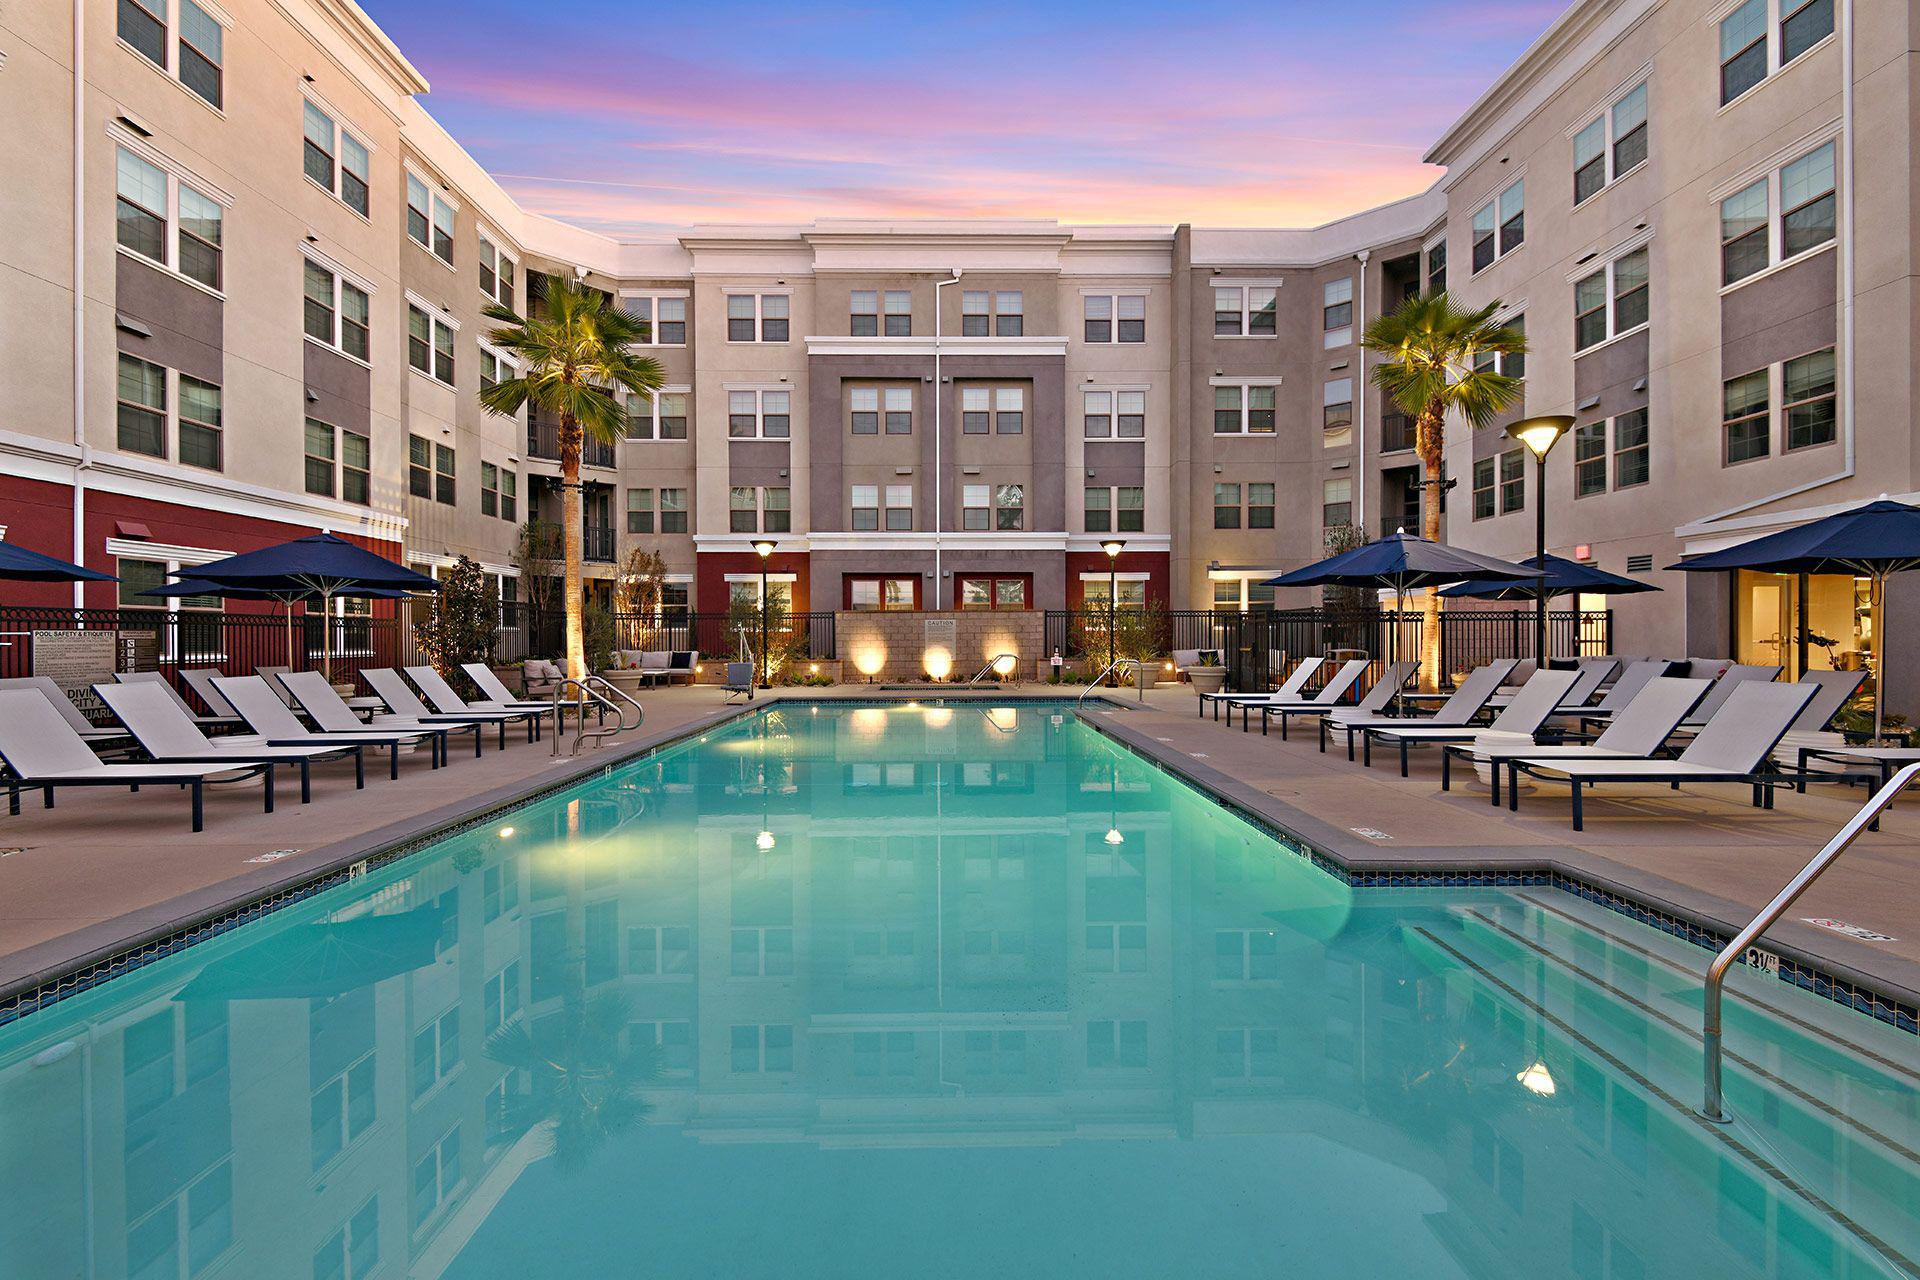 Resort-style swimming pool at The Huntington luxury apartments in Duarte, CA.